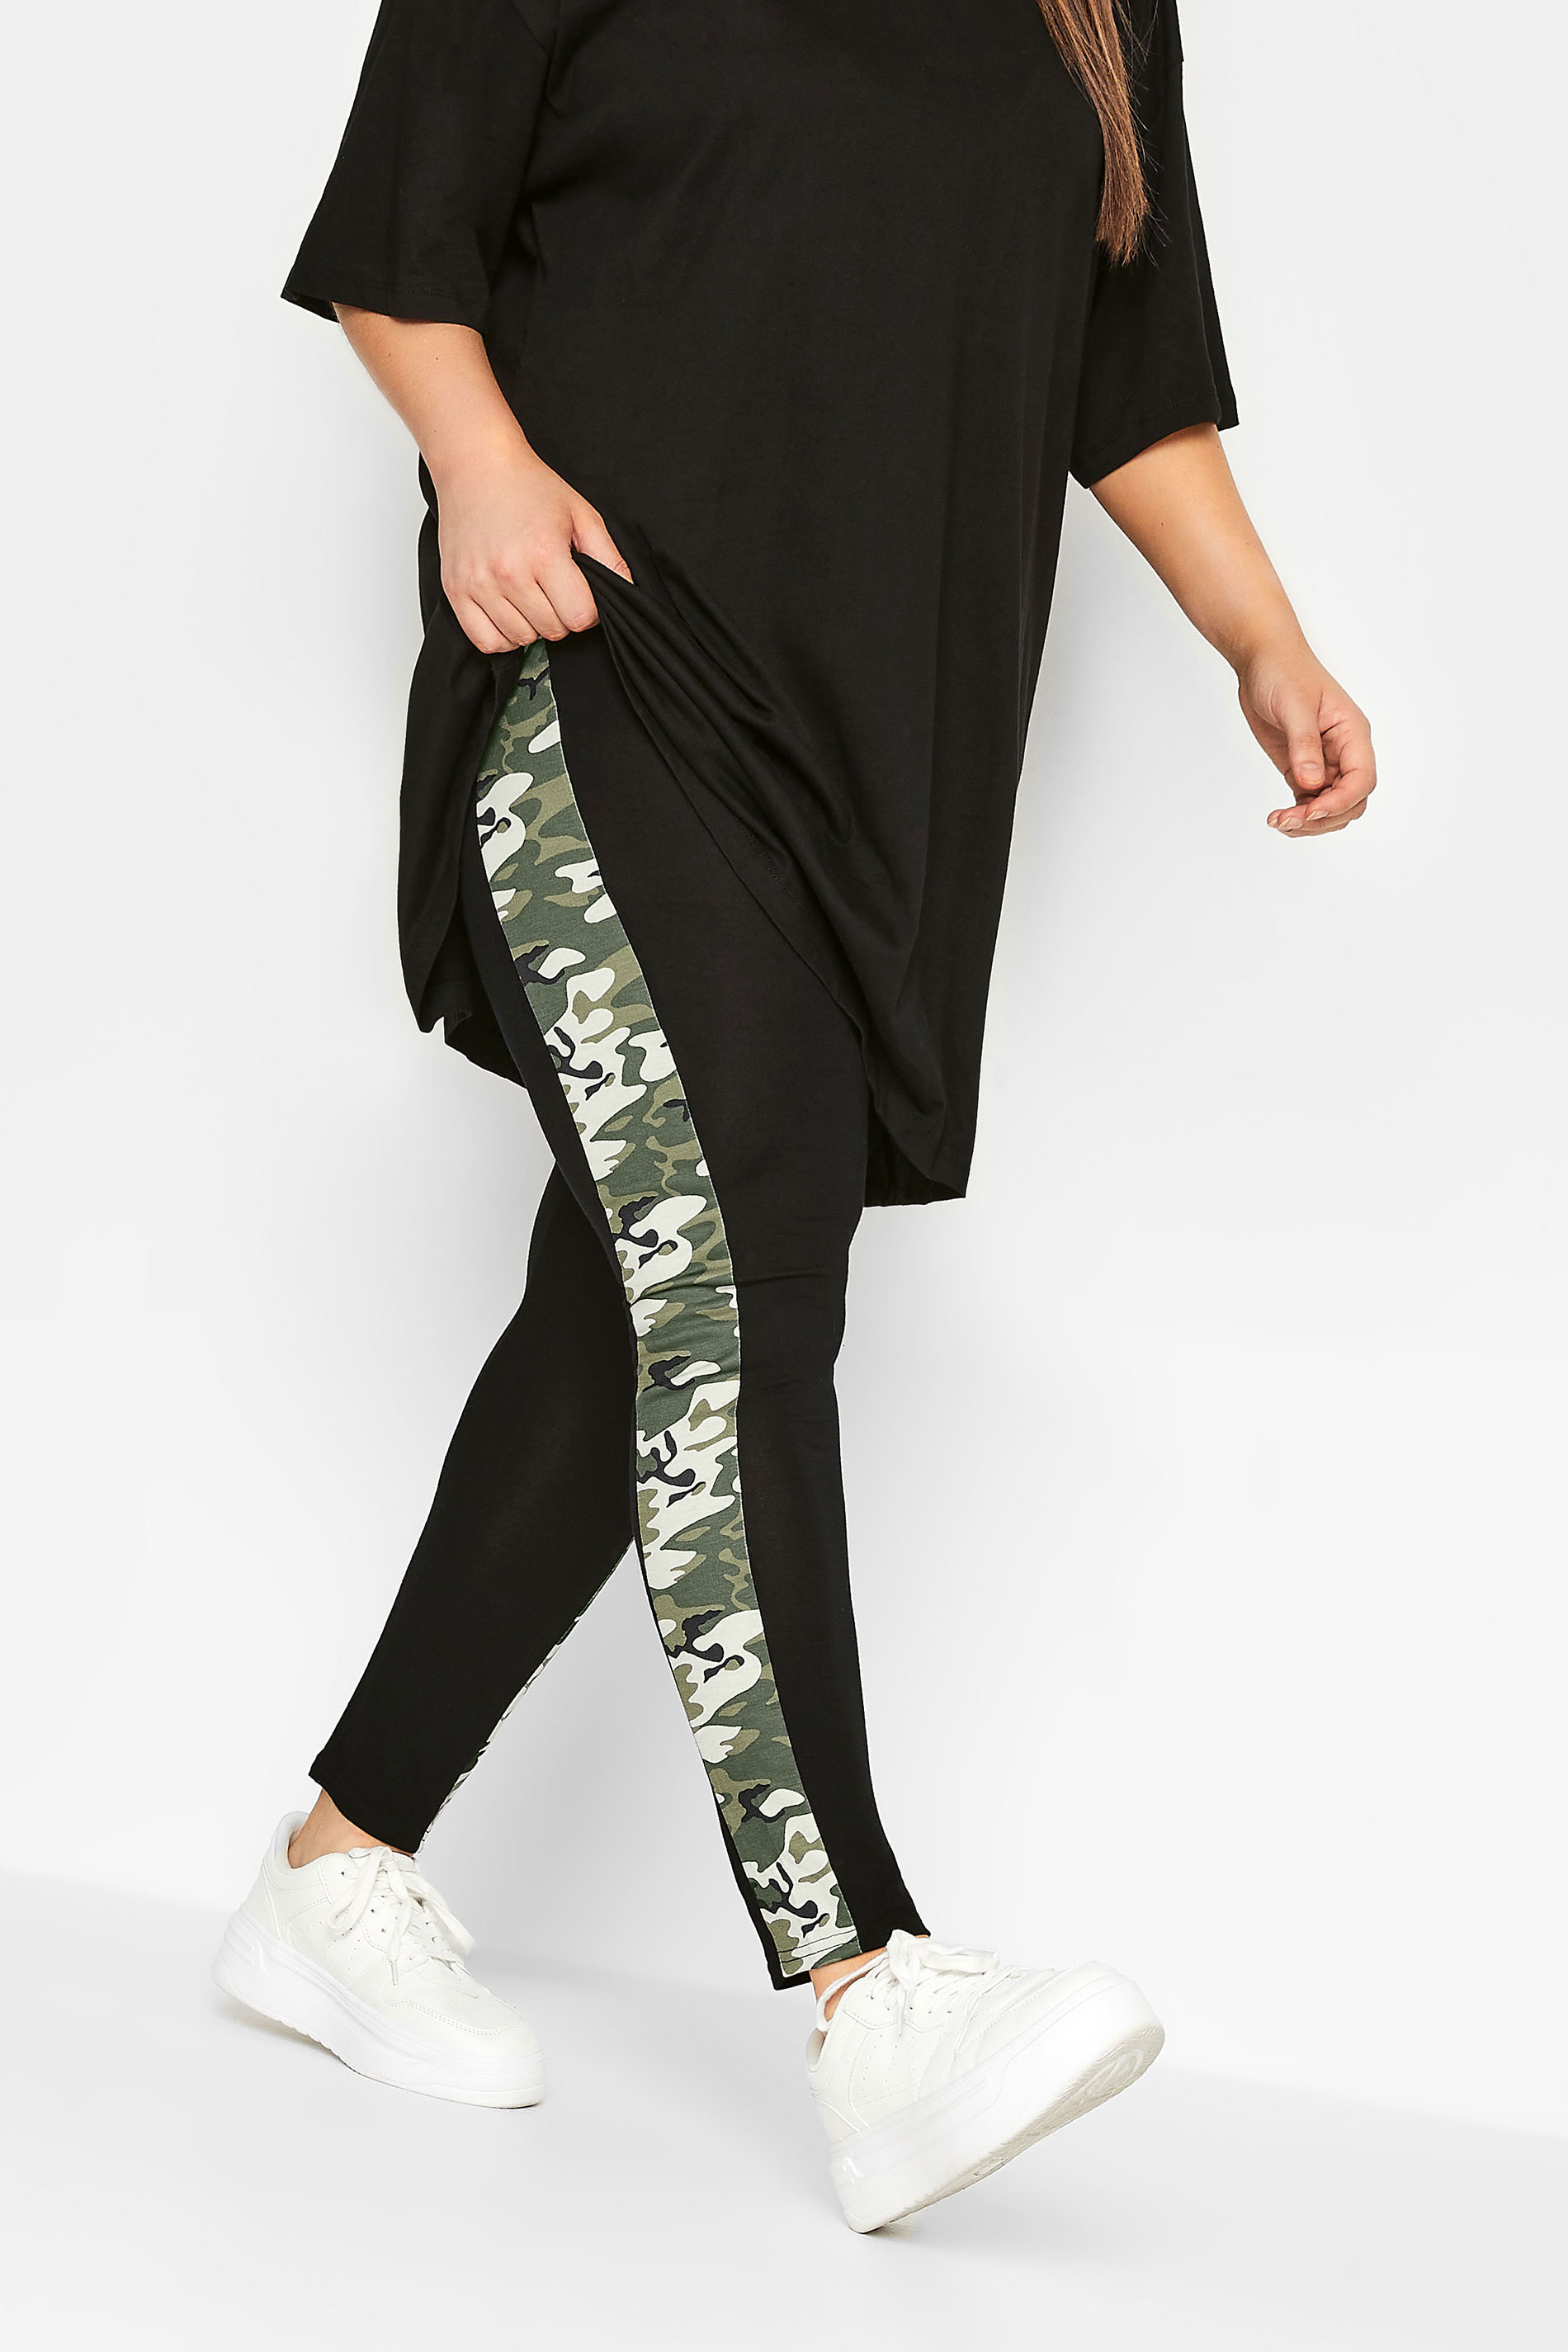 LIMITED COLLECTION Plus Size Black & Green Camo Side Panel Leggings 2